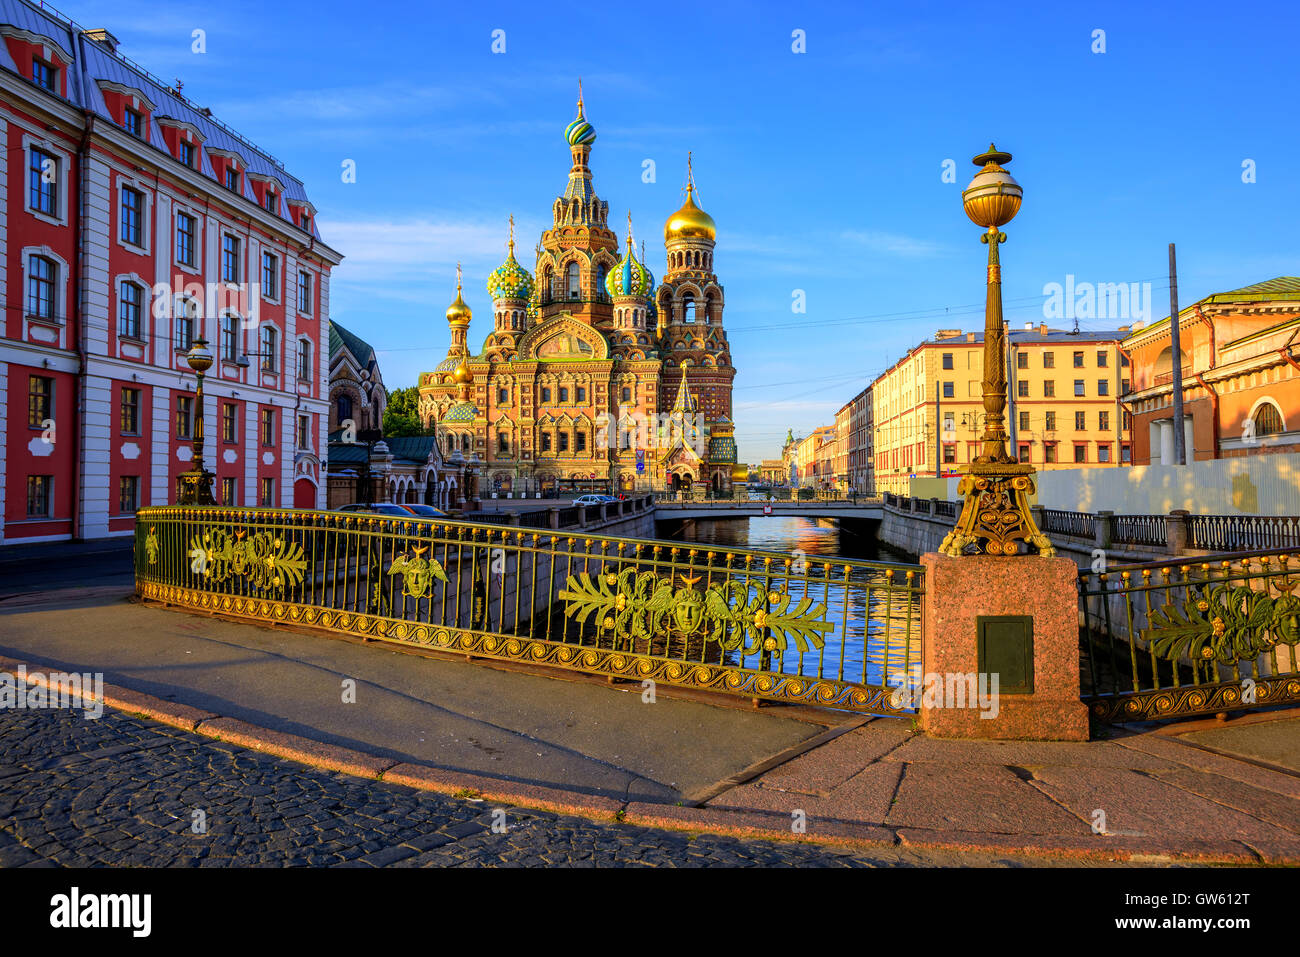 The Church of the Savior on Spilled Blood on Griboyedov canal in the early morning light, St. Petersburg, Russia. Stock Photo